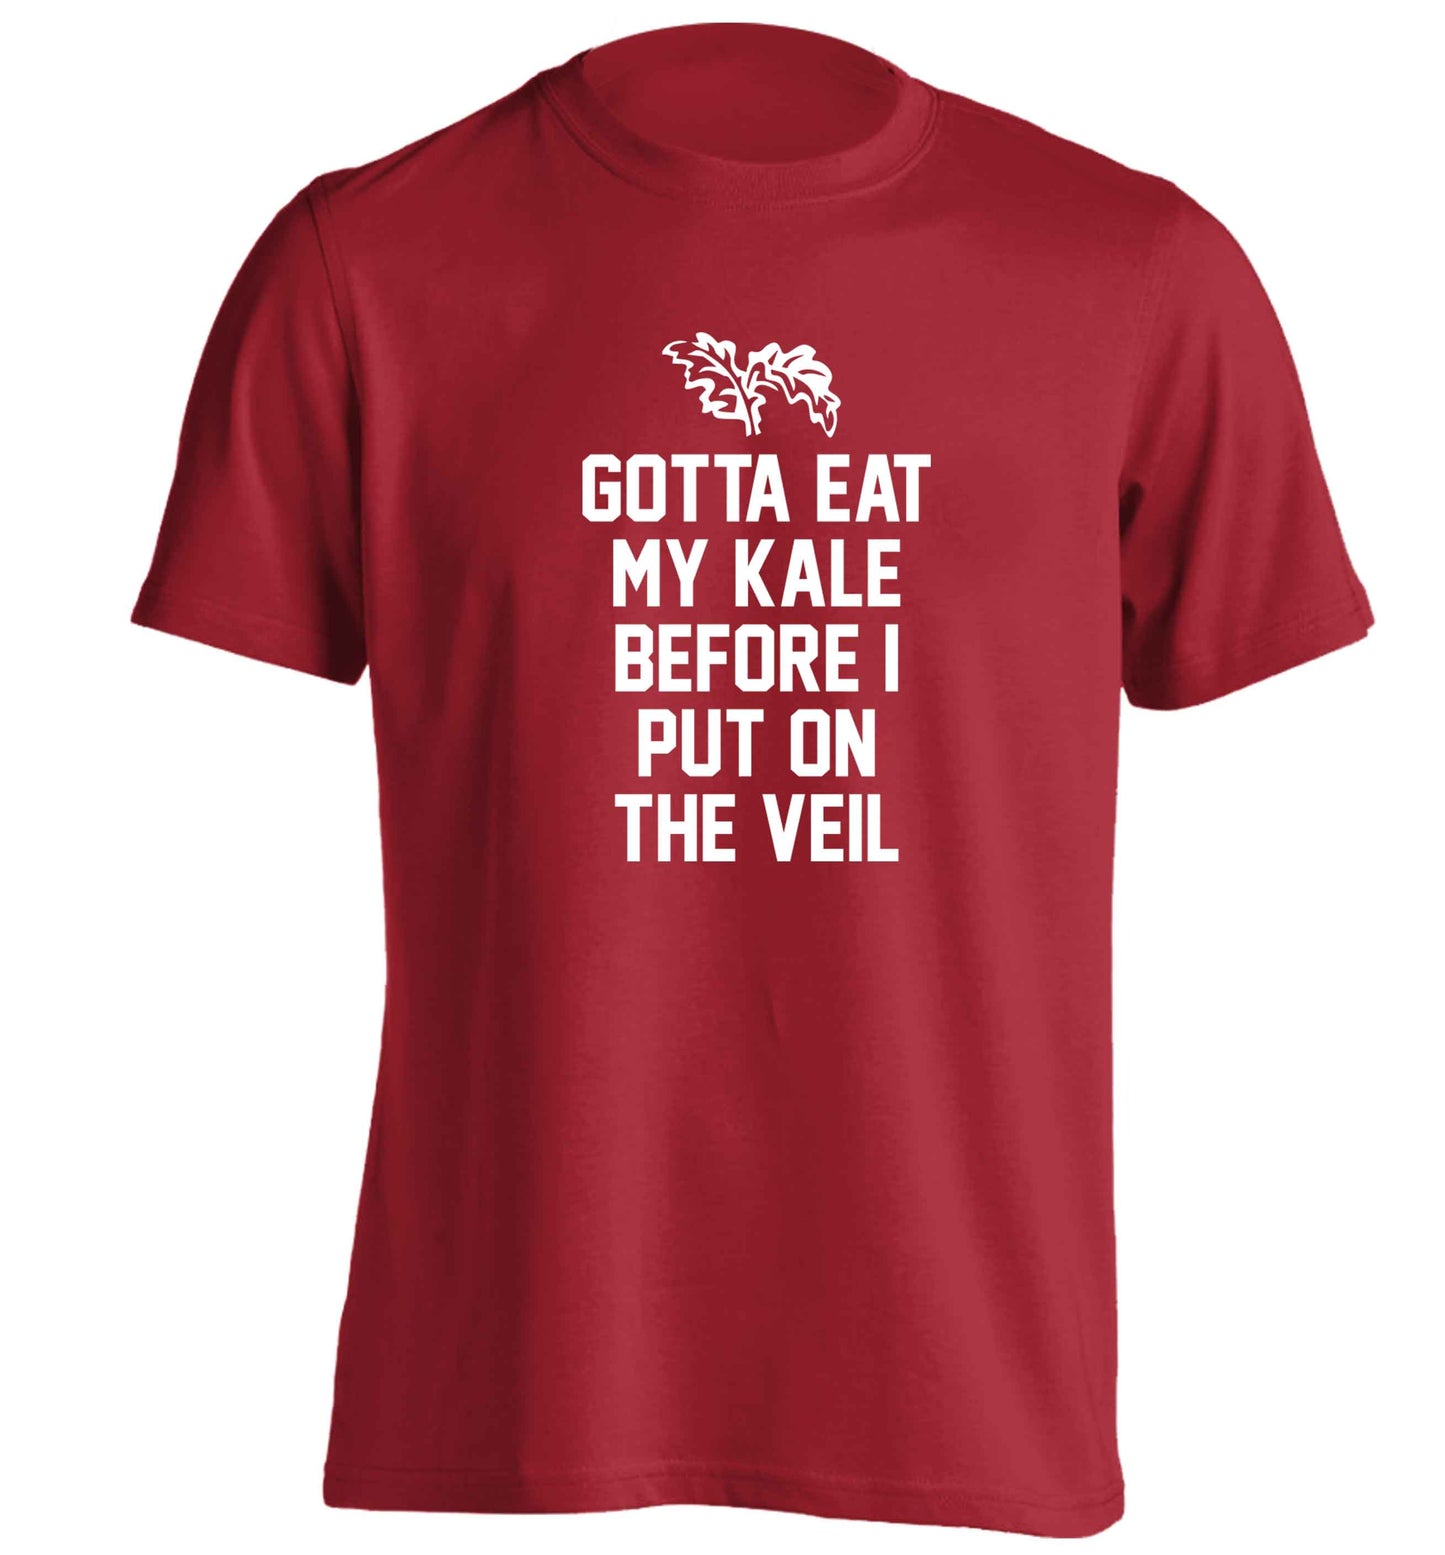 Gotta eat my kale before I put on the veil adults unisex red Tshirt 2XL